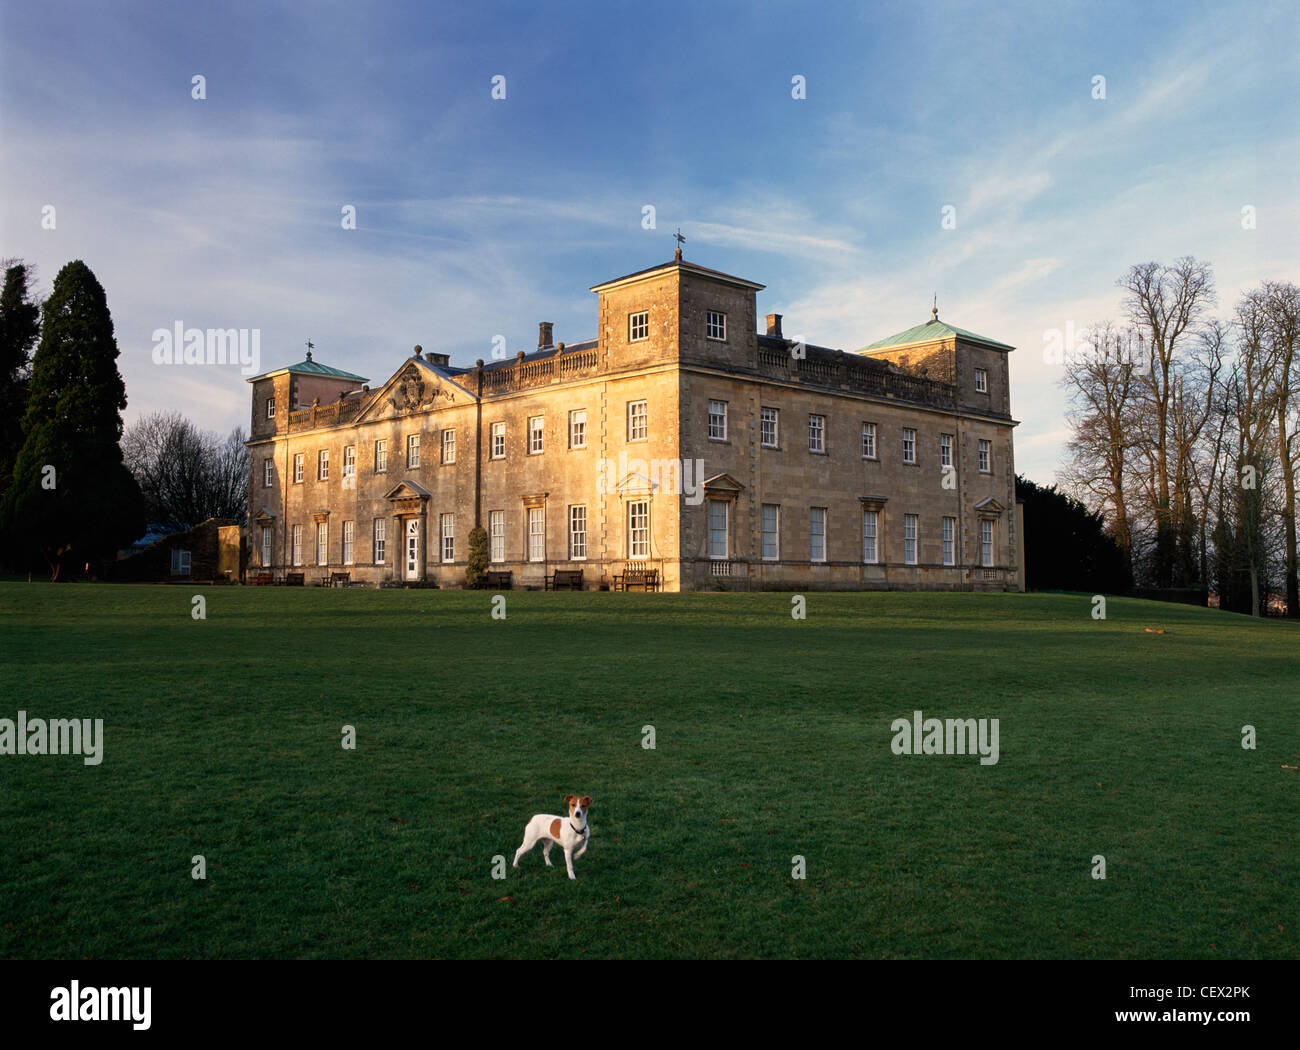 A Jack Russell dog on the lawn in front of historic Lydiard House, a stately home set in parkland near Swindon. Stock Photo